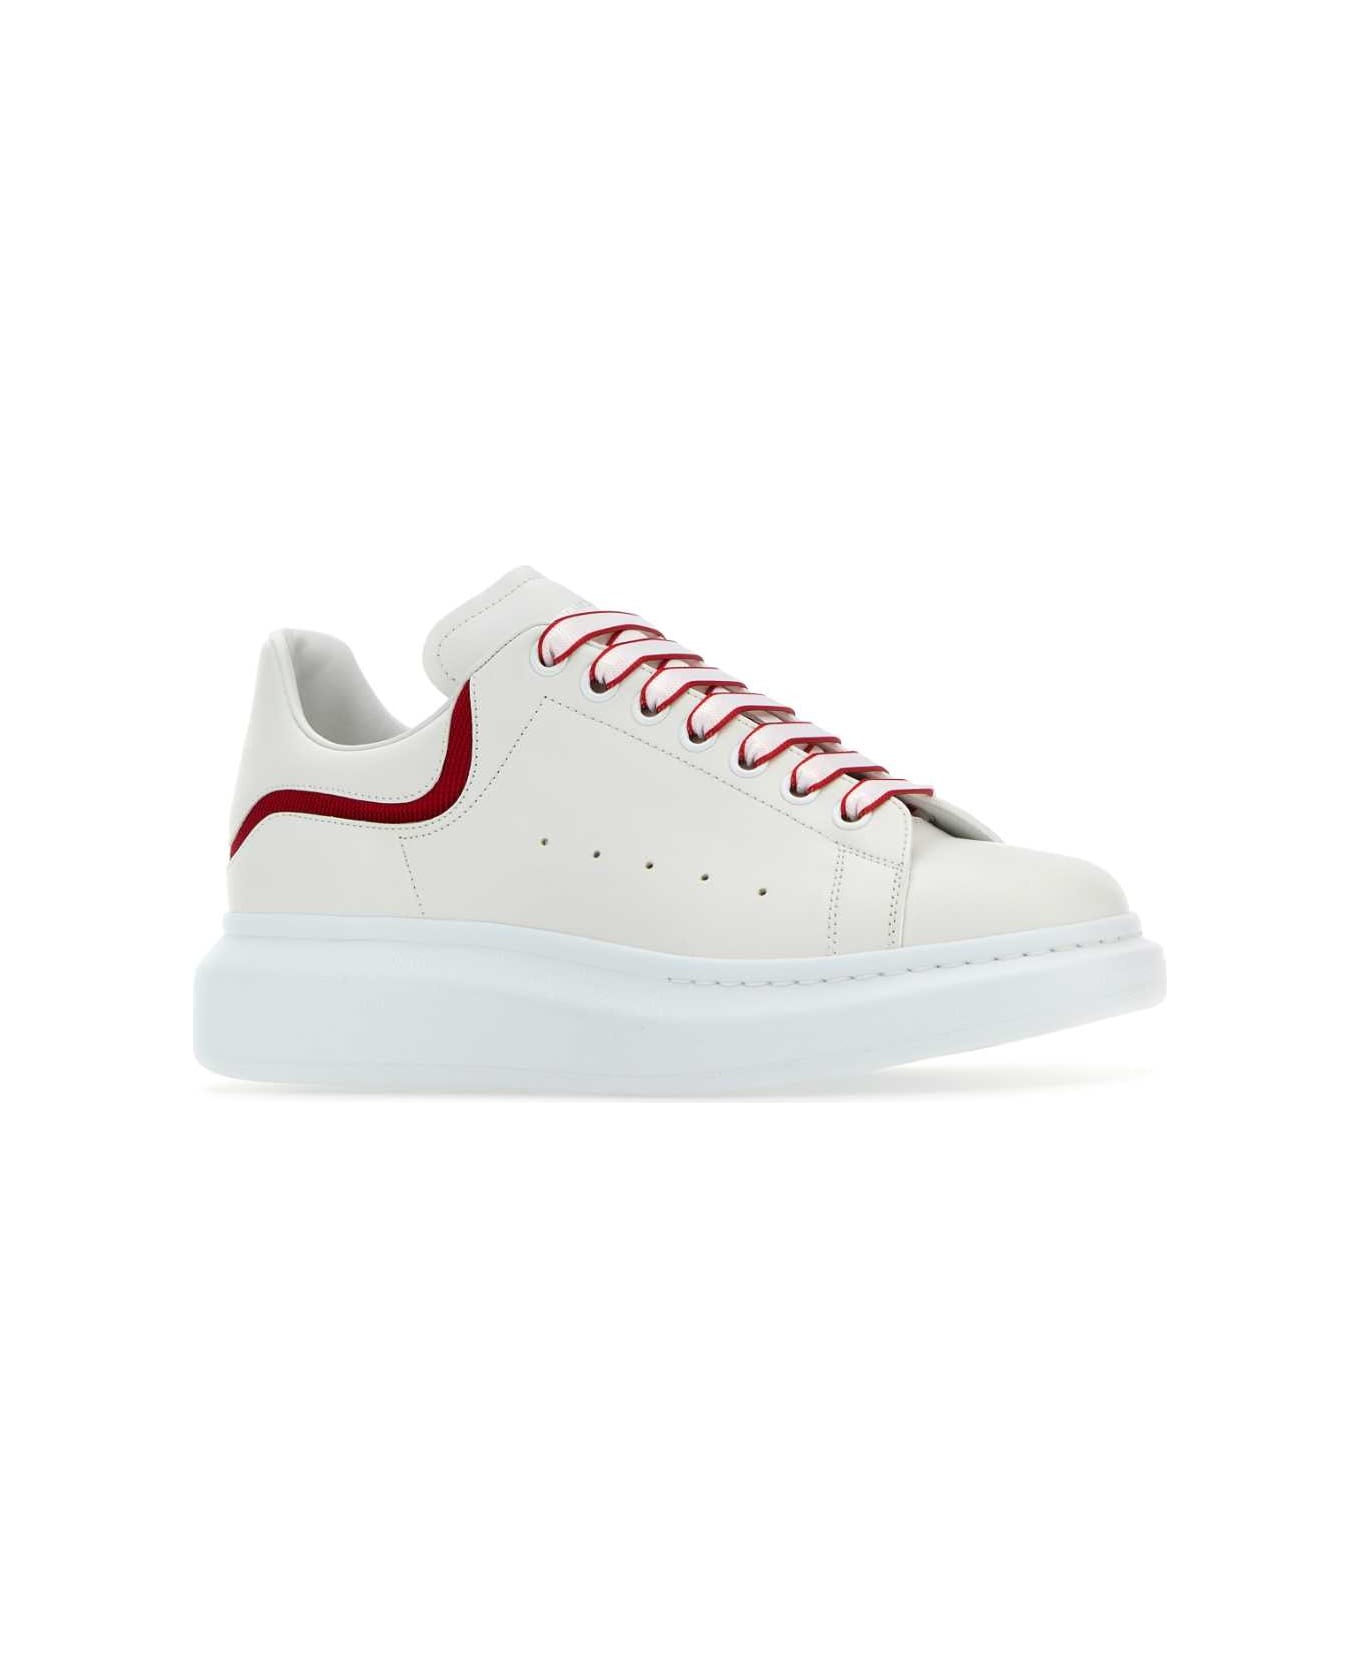 Alexander McQueen White Leather Sneakers With White Leather Heel - WHITERED